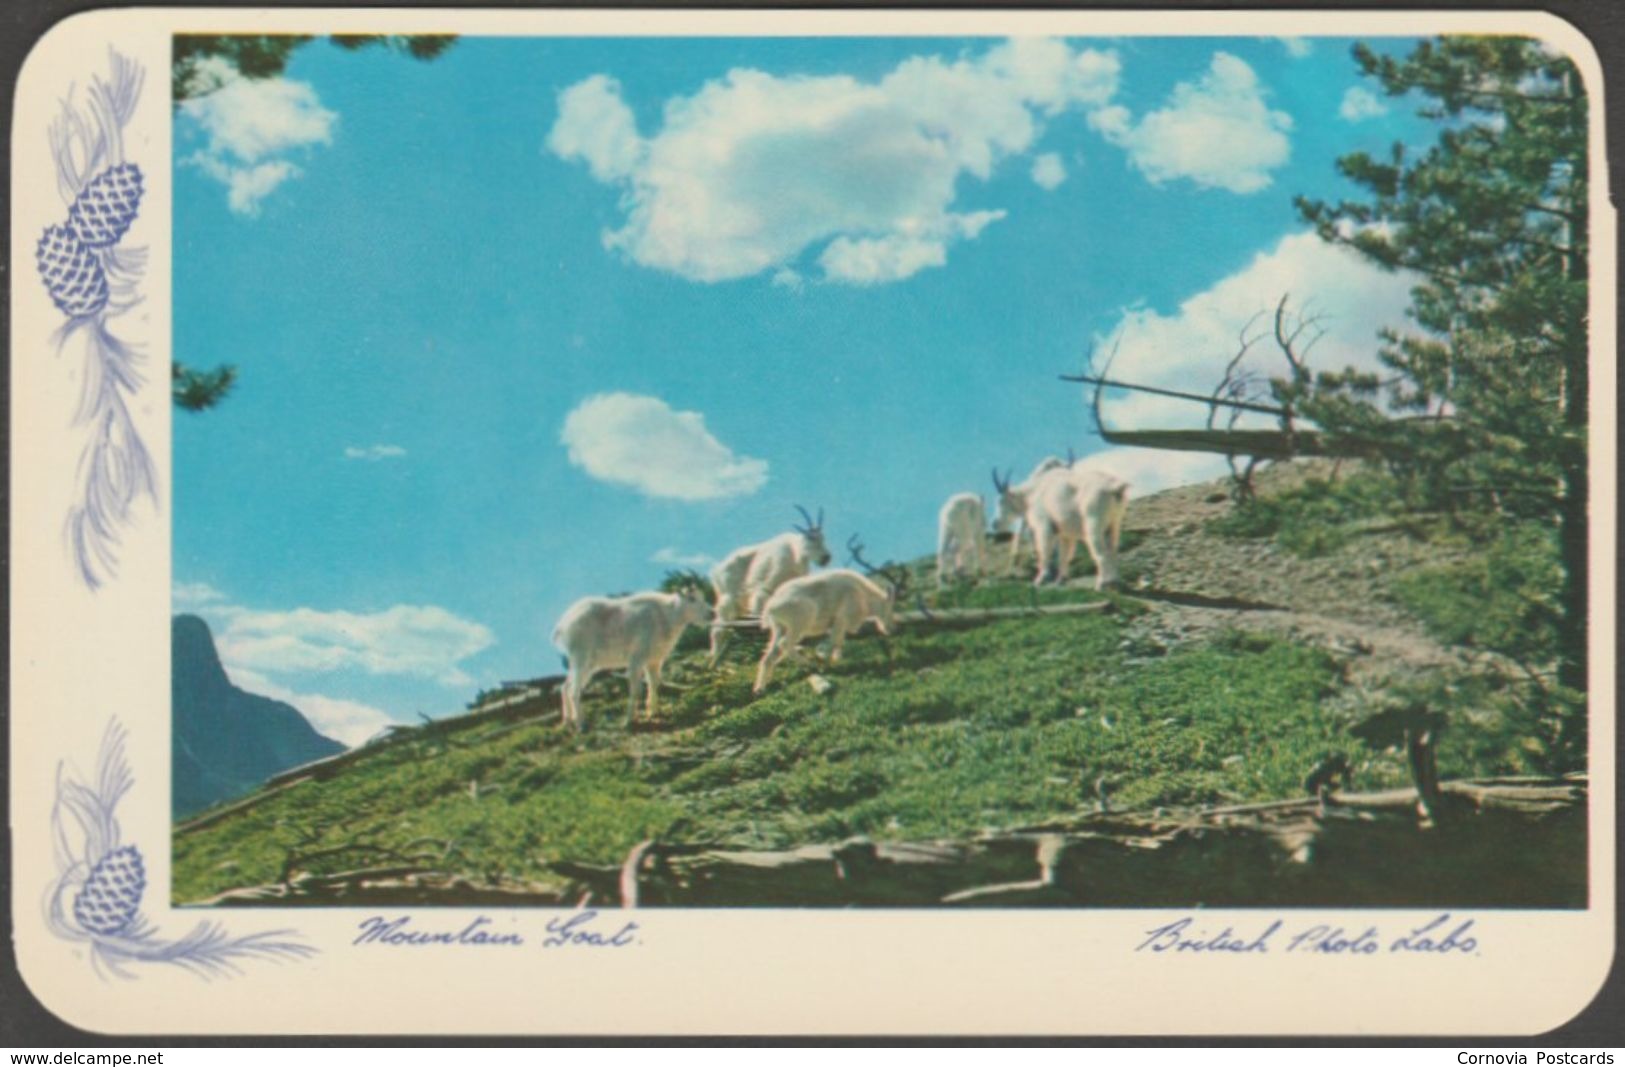 Animals of the Canadian Rockies, 1957 - Smith Lithograph Co Eight Postcards